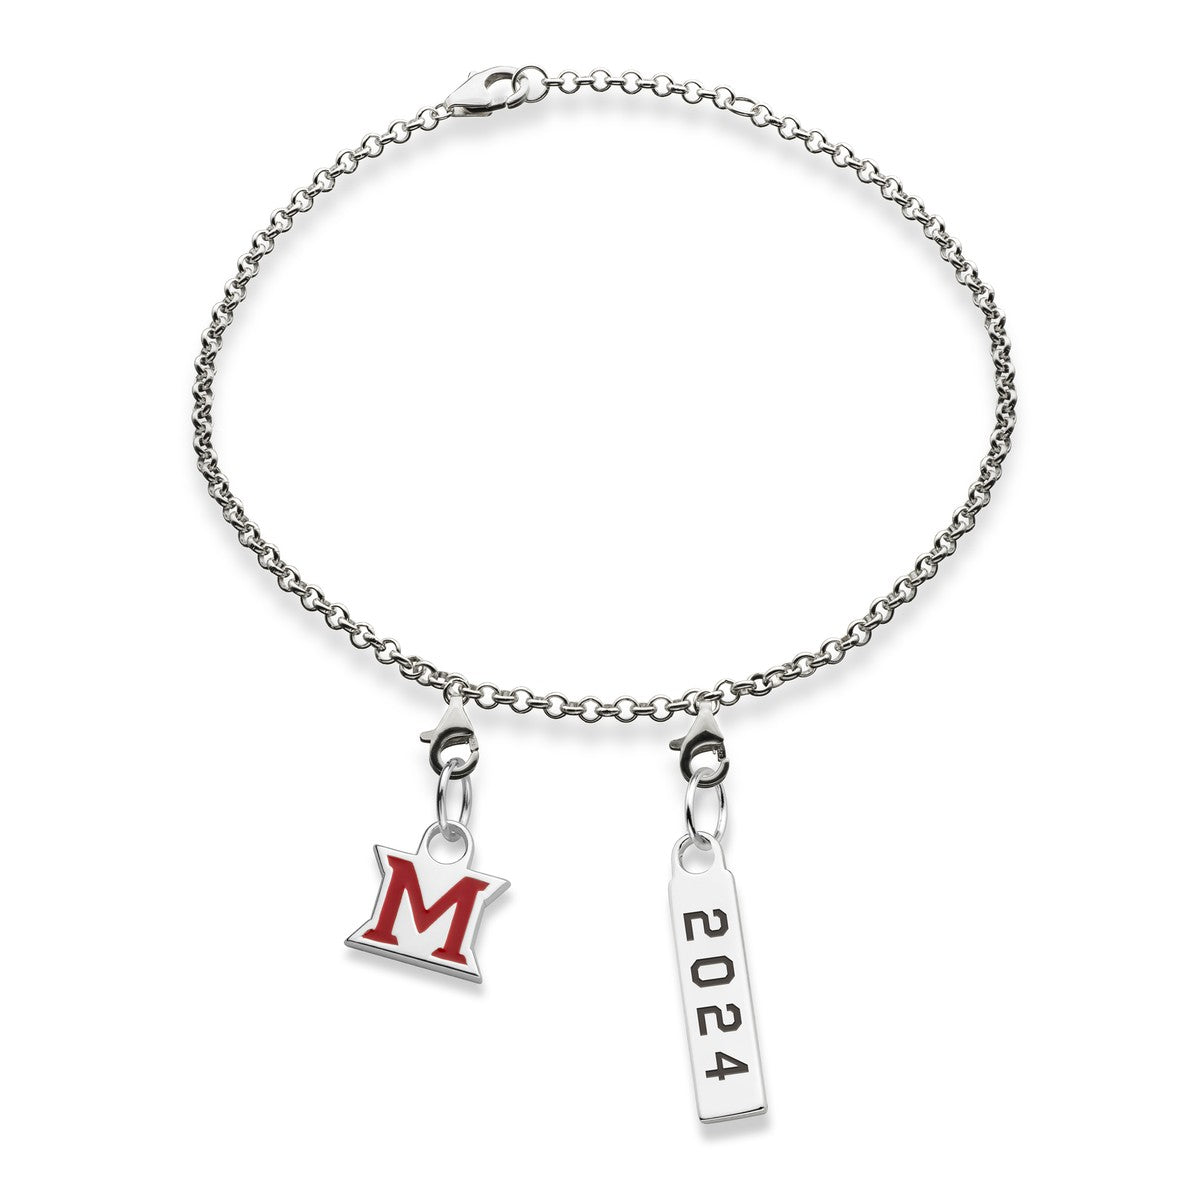 Personalised Best Friends Charm Bracelet - compatible with all 9mm Italian  Style Charm Bracelets : Amazon.co.uk